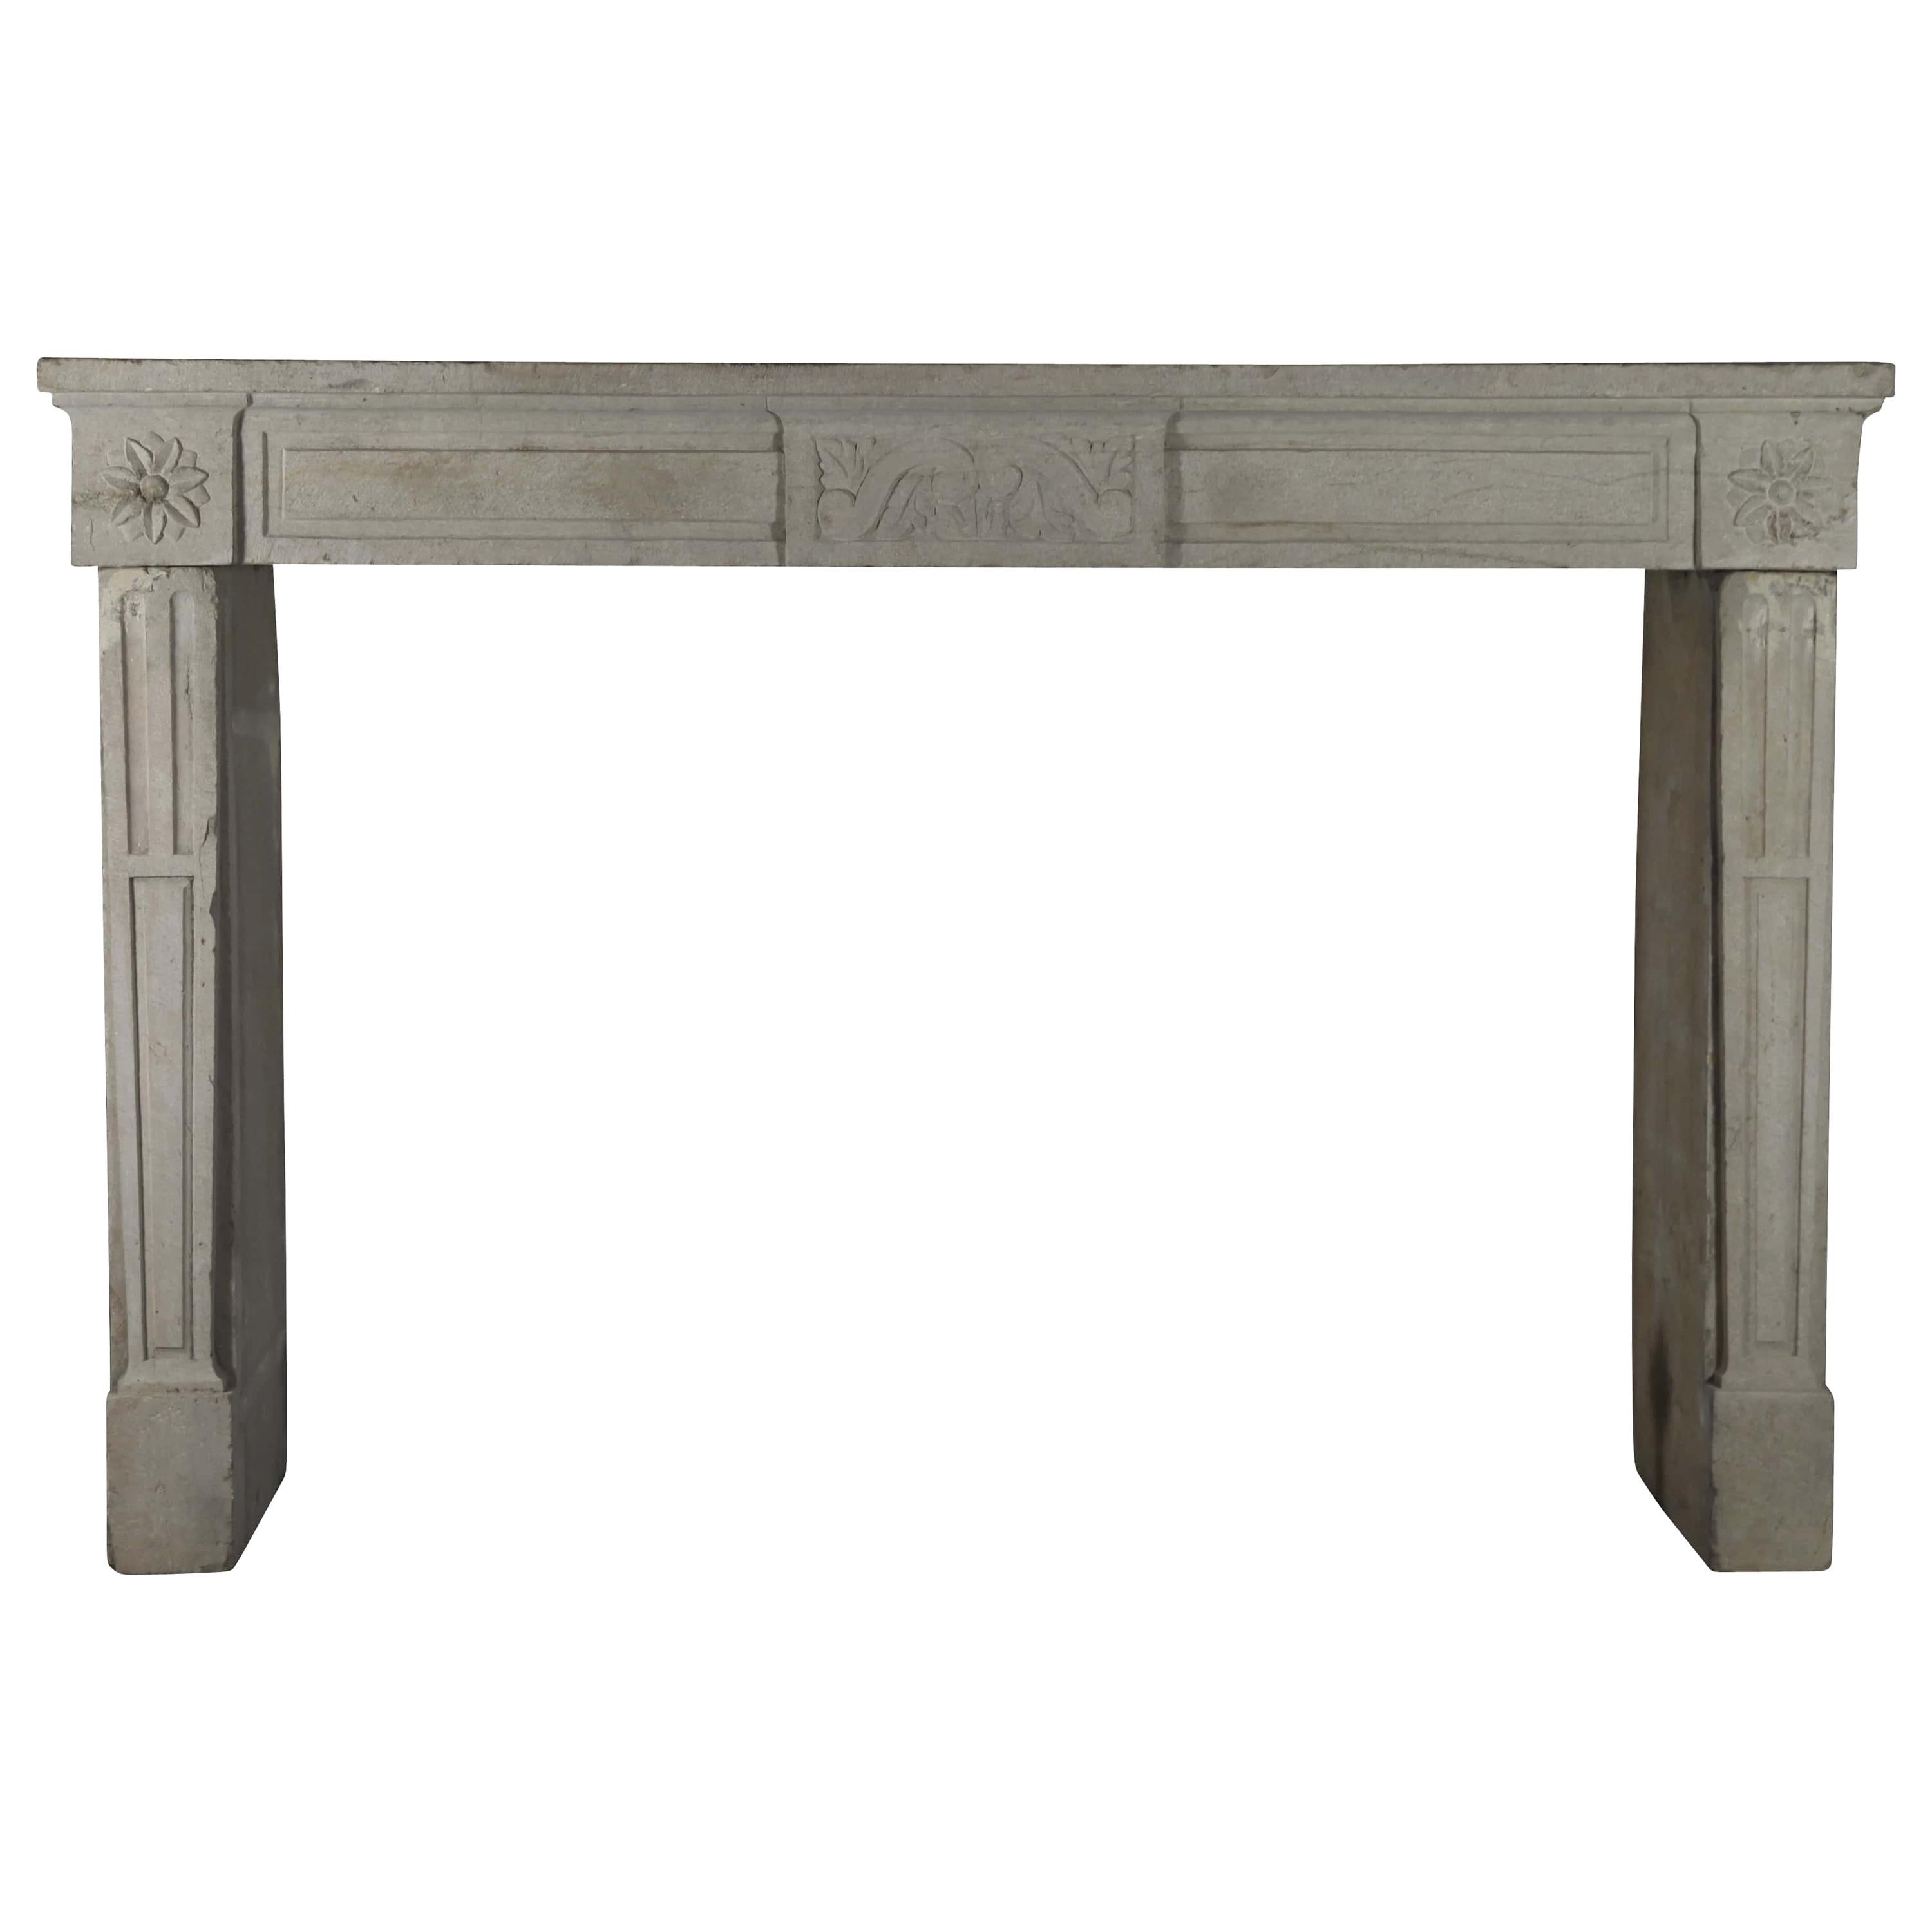 Vintage French Country Style Limestone Fireplace Surround